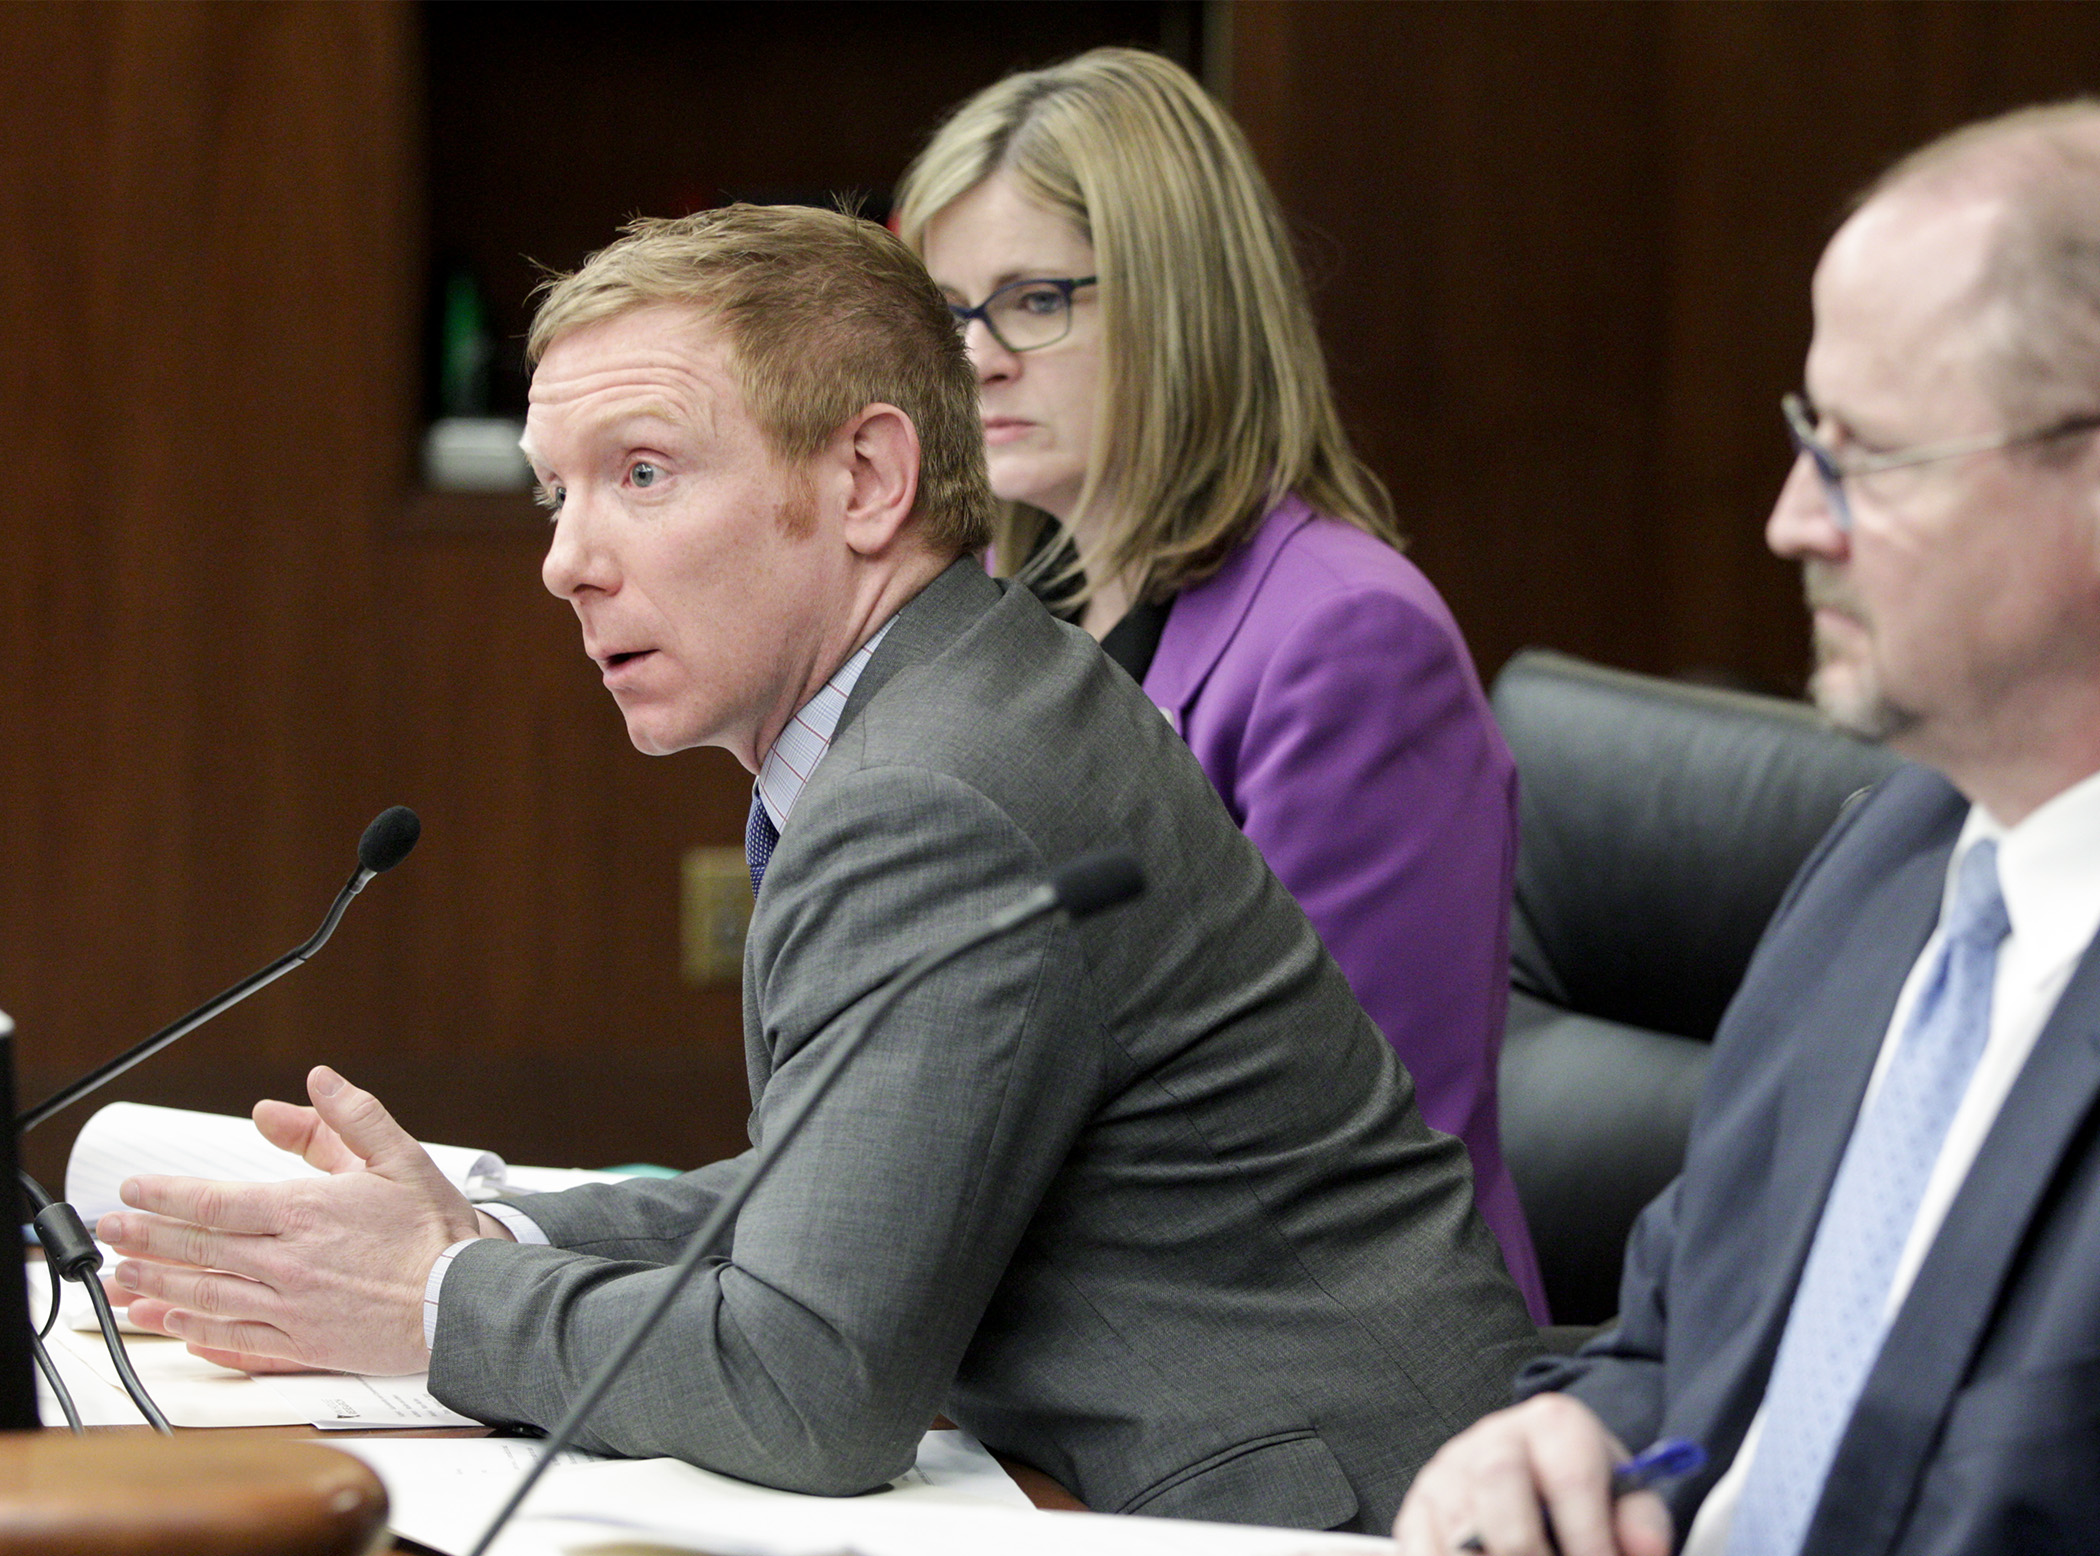 Sean Burke, public policy director for Minnesota Elder Justice Center, testifies Tuesday in support of HF3391 that would modify and modernize certain provisions governing guardianship and conservatorship. Photo by Paul Battaglia